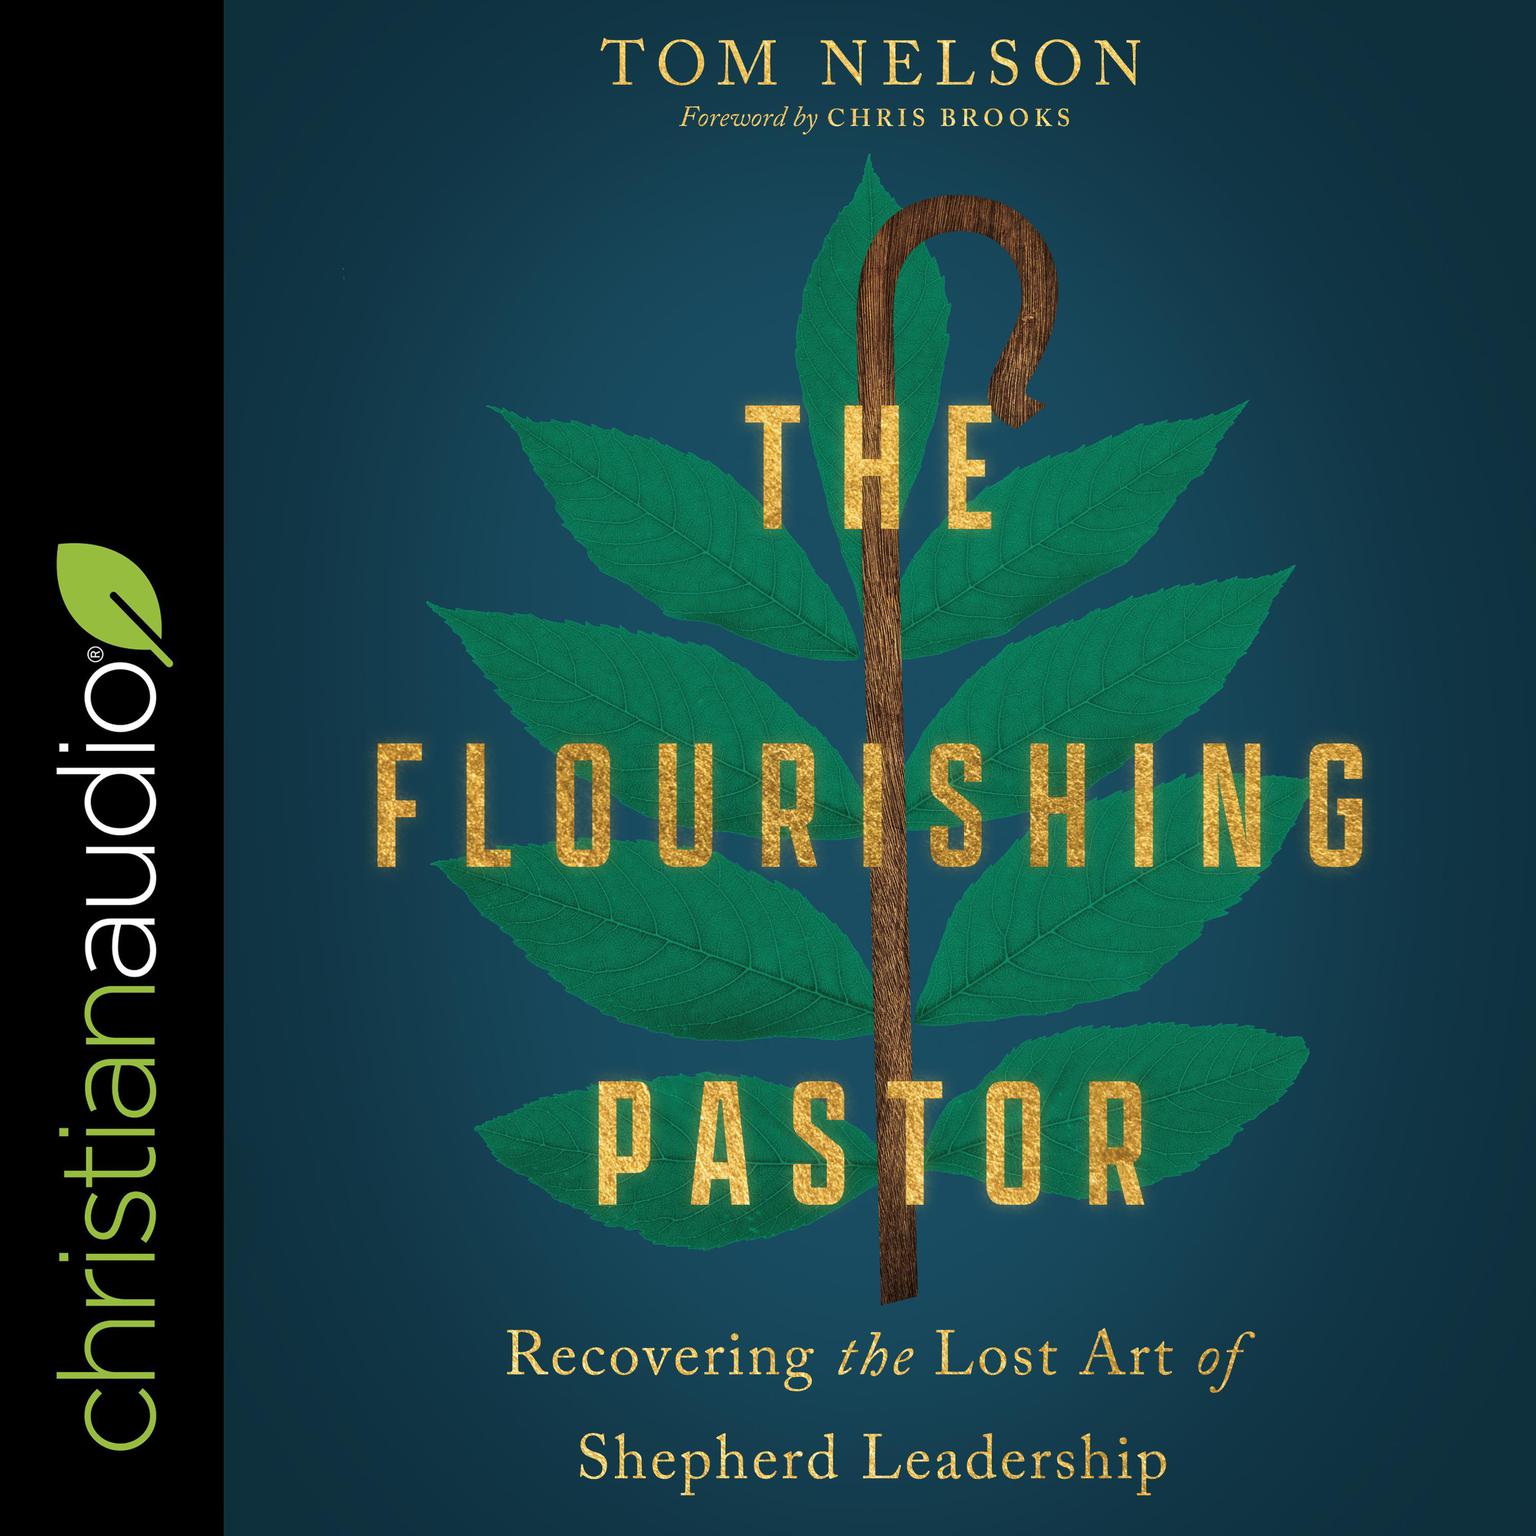 The Flourishing Pastor: Recovering the Lost Art of Shepherd Leadership Audiobook, by Tom Nelson